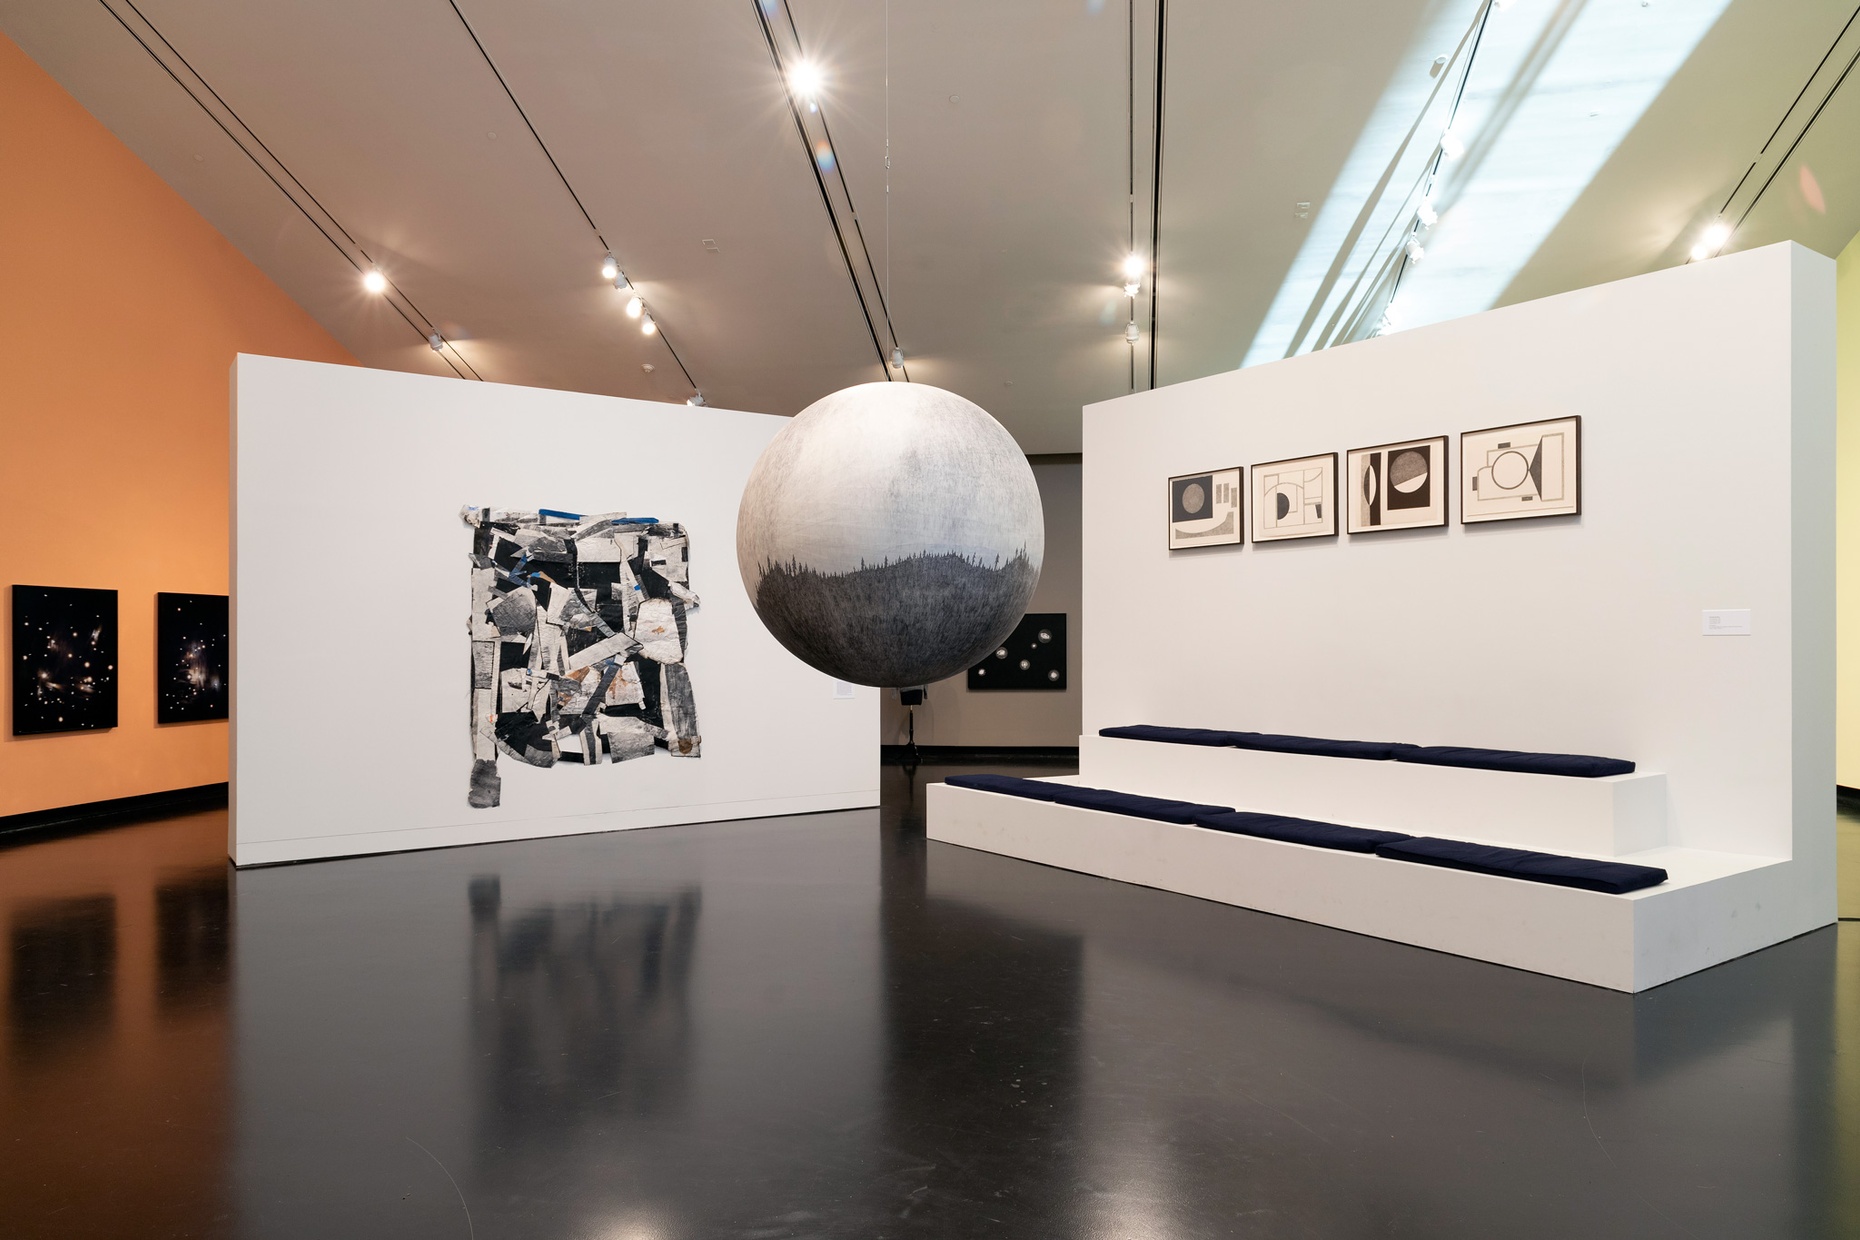 In a gallery, two freestanding white walls, featuring hanging artworks, are angled towards the center of the image where a light and dark gray sphere hangs from the ceiling.